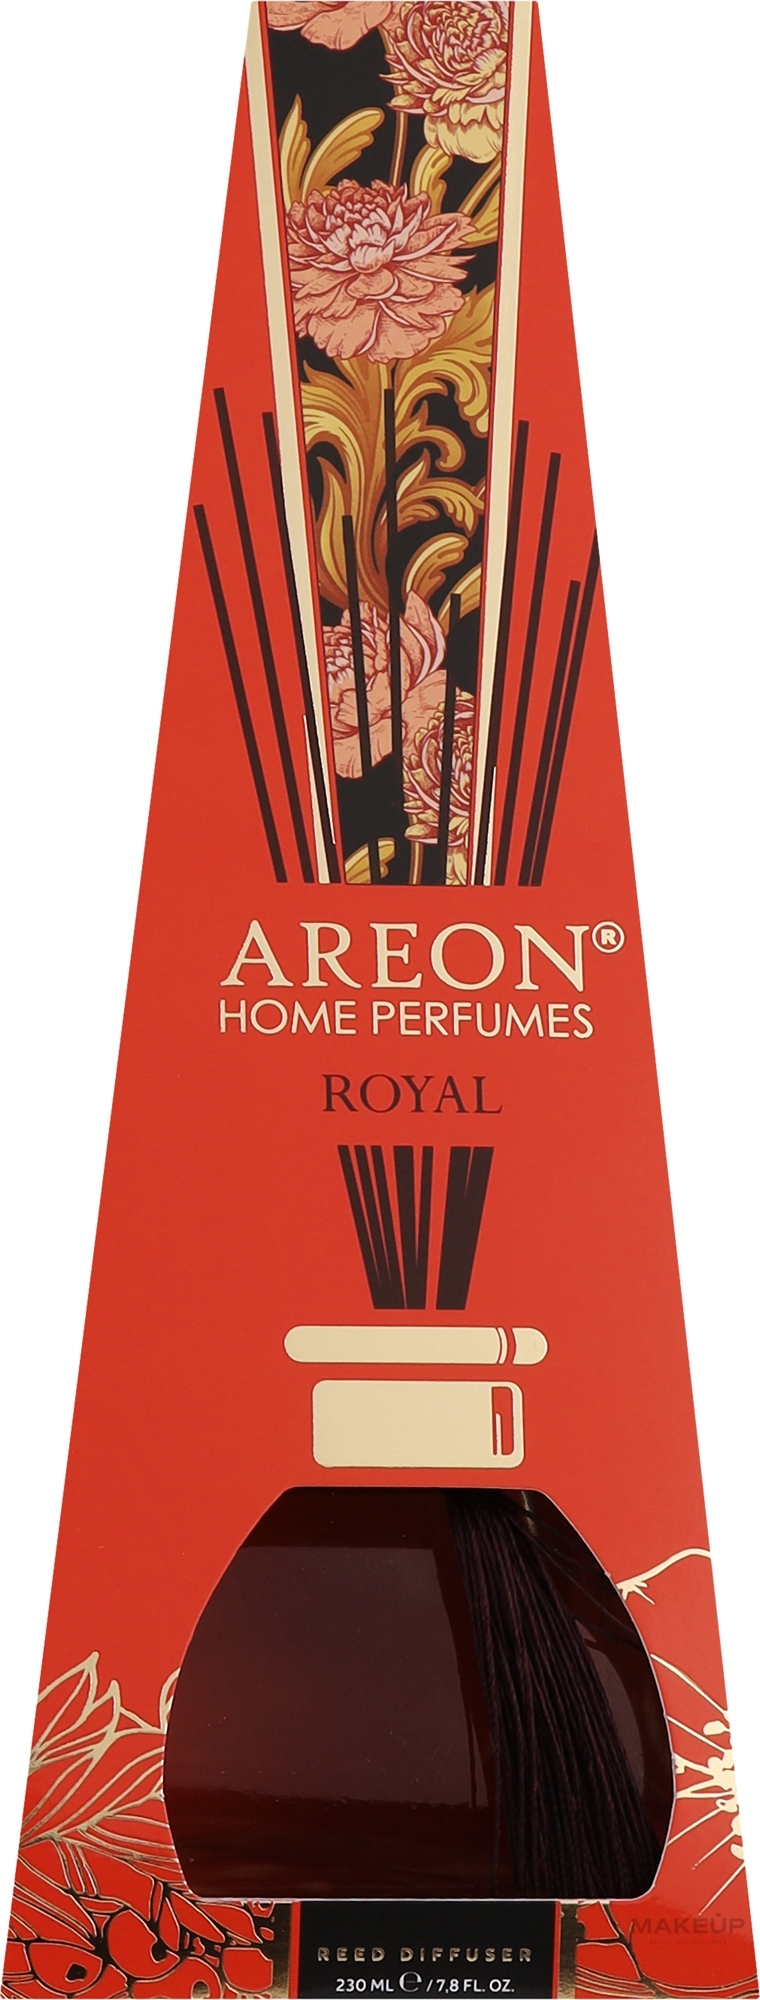 Dyfuzor zapachowy - Areon Home Perfume Exclusive Selection Royal Reed Diffuser — Zdjęcie 230 ml